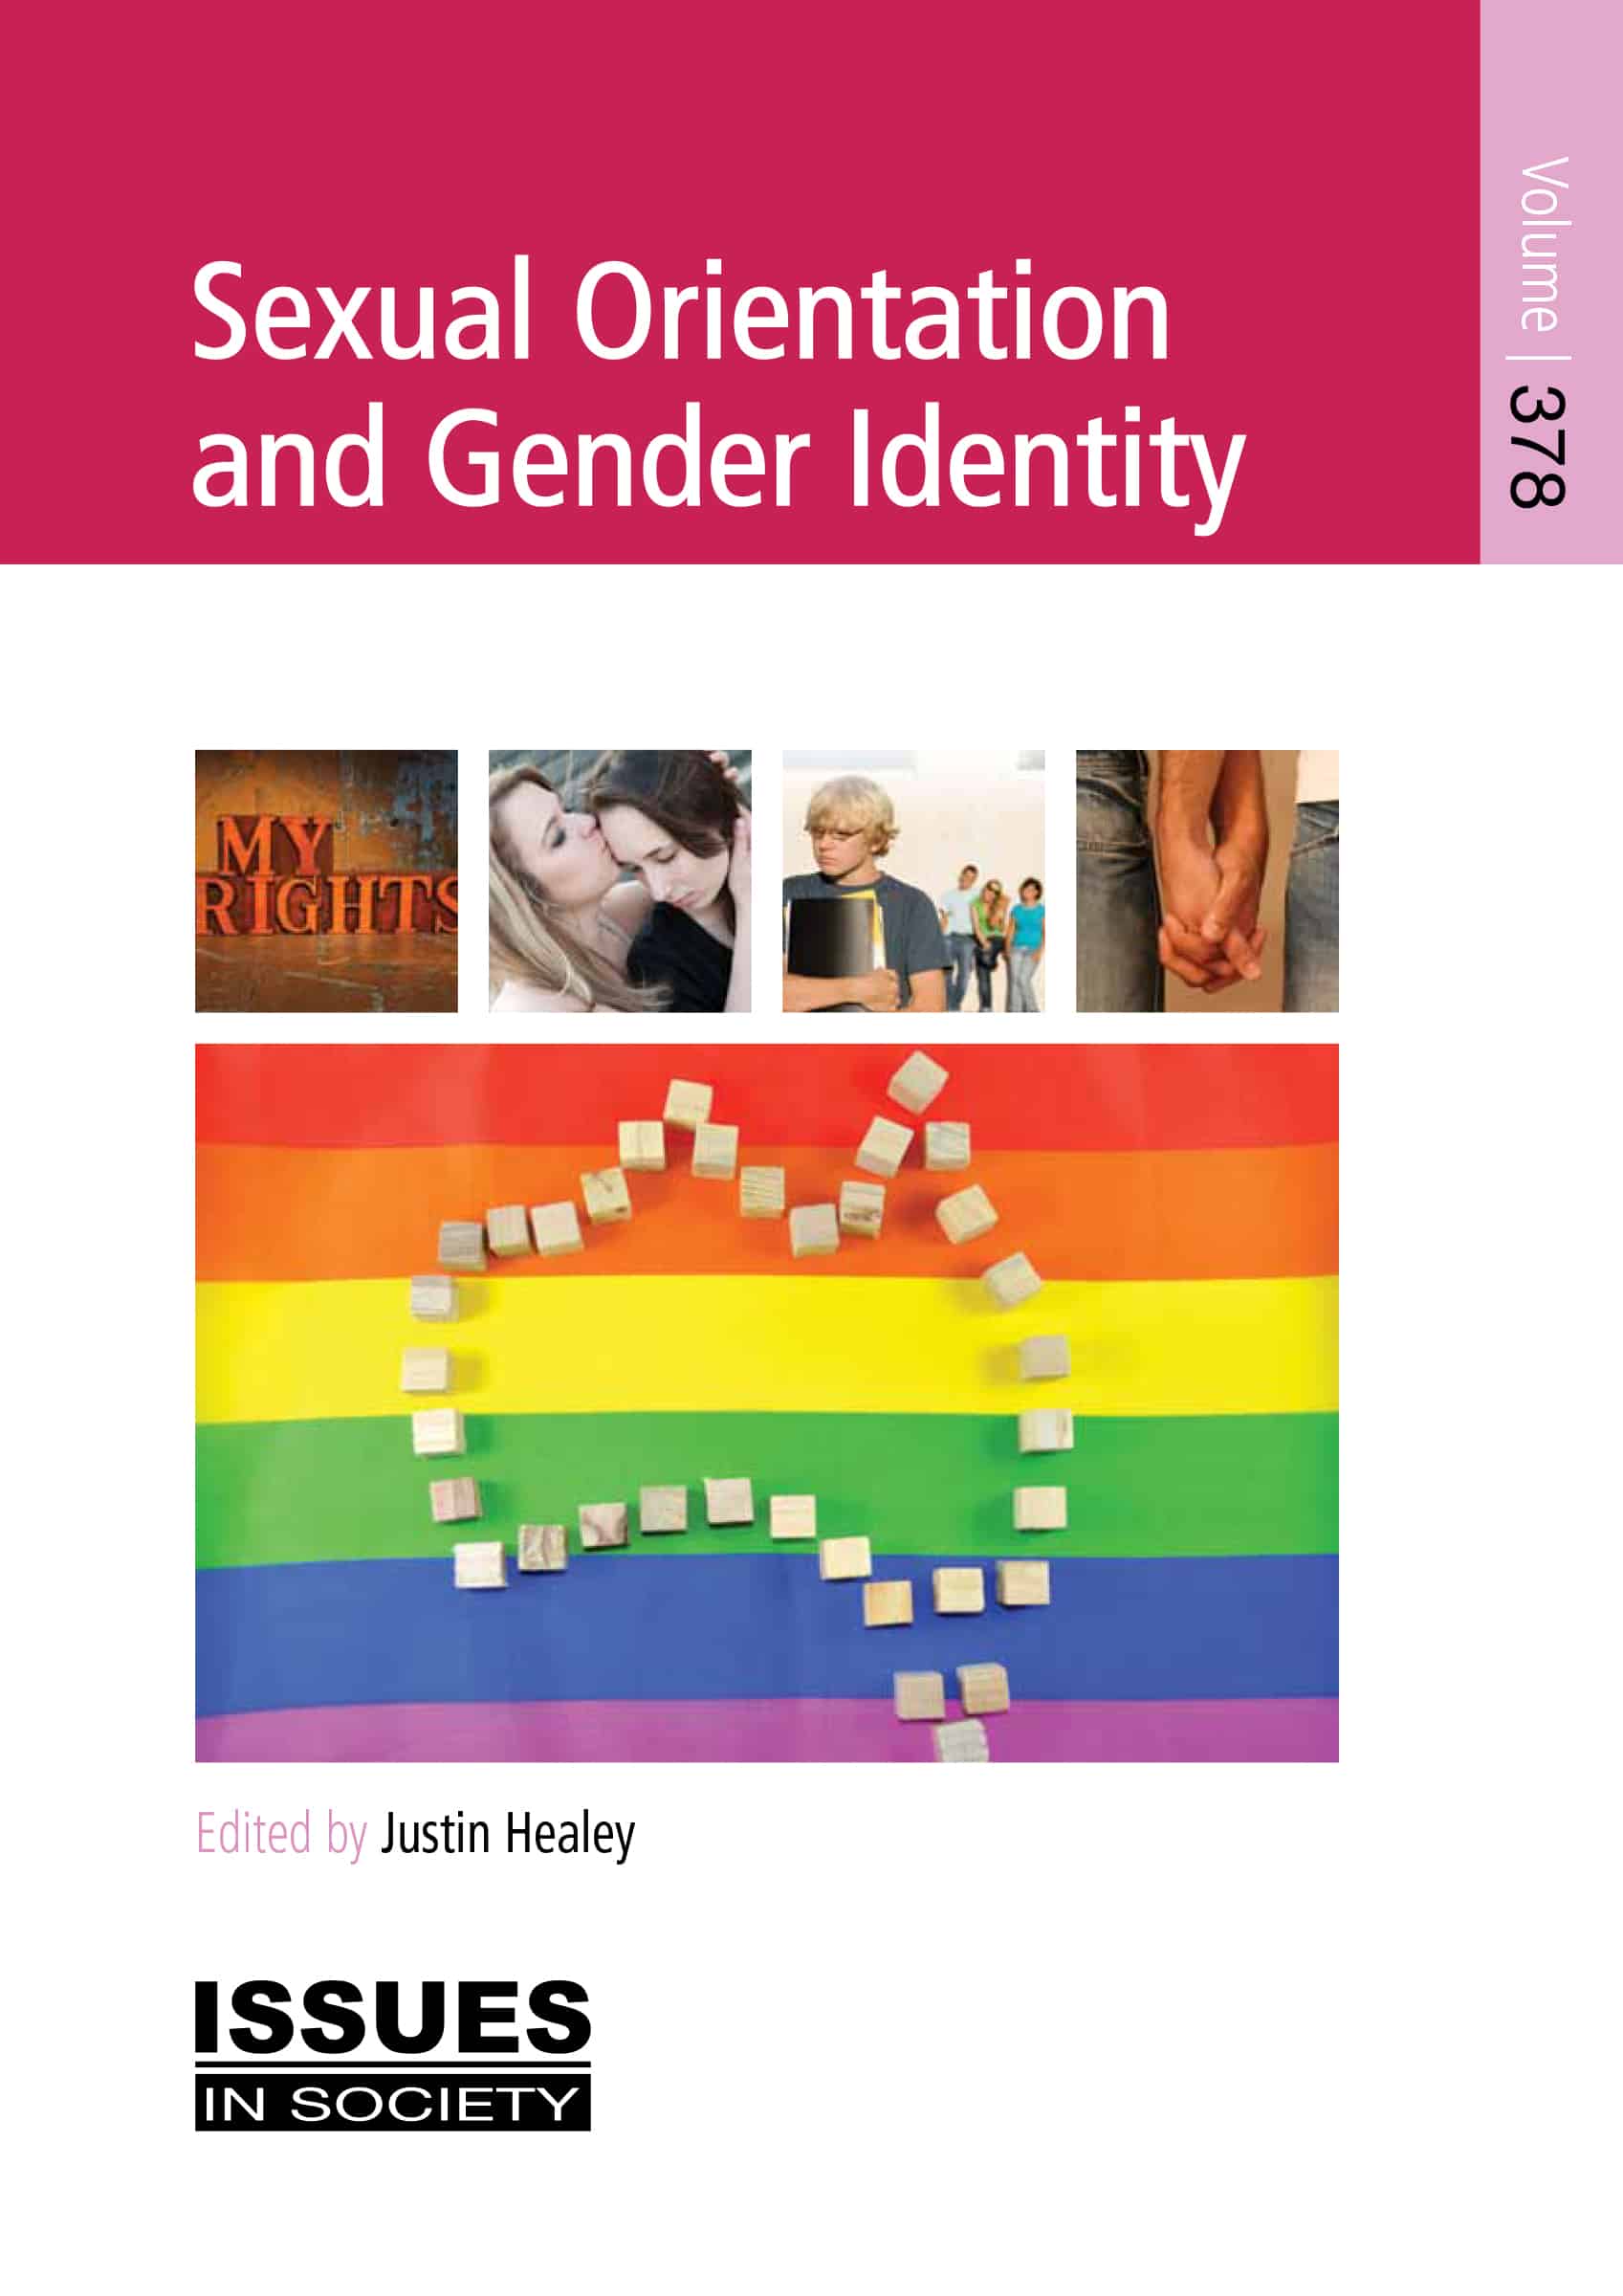 research topic about gender identity